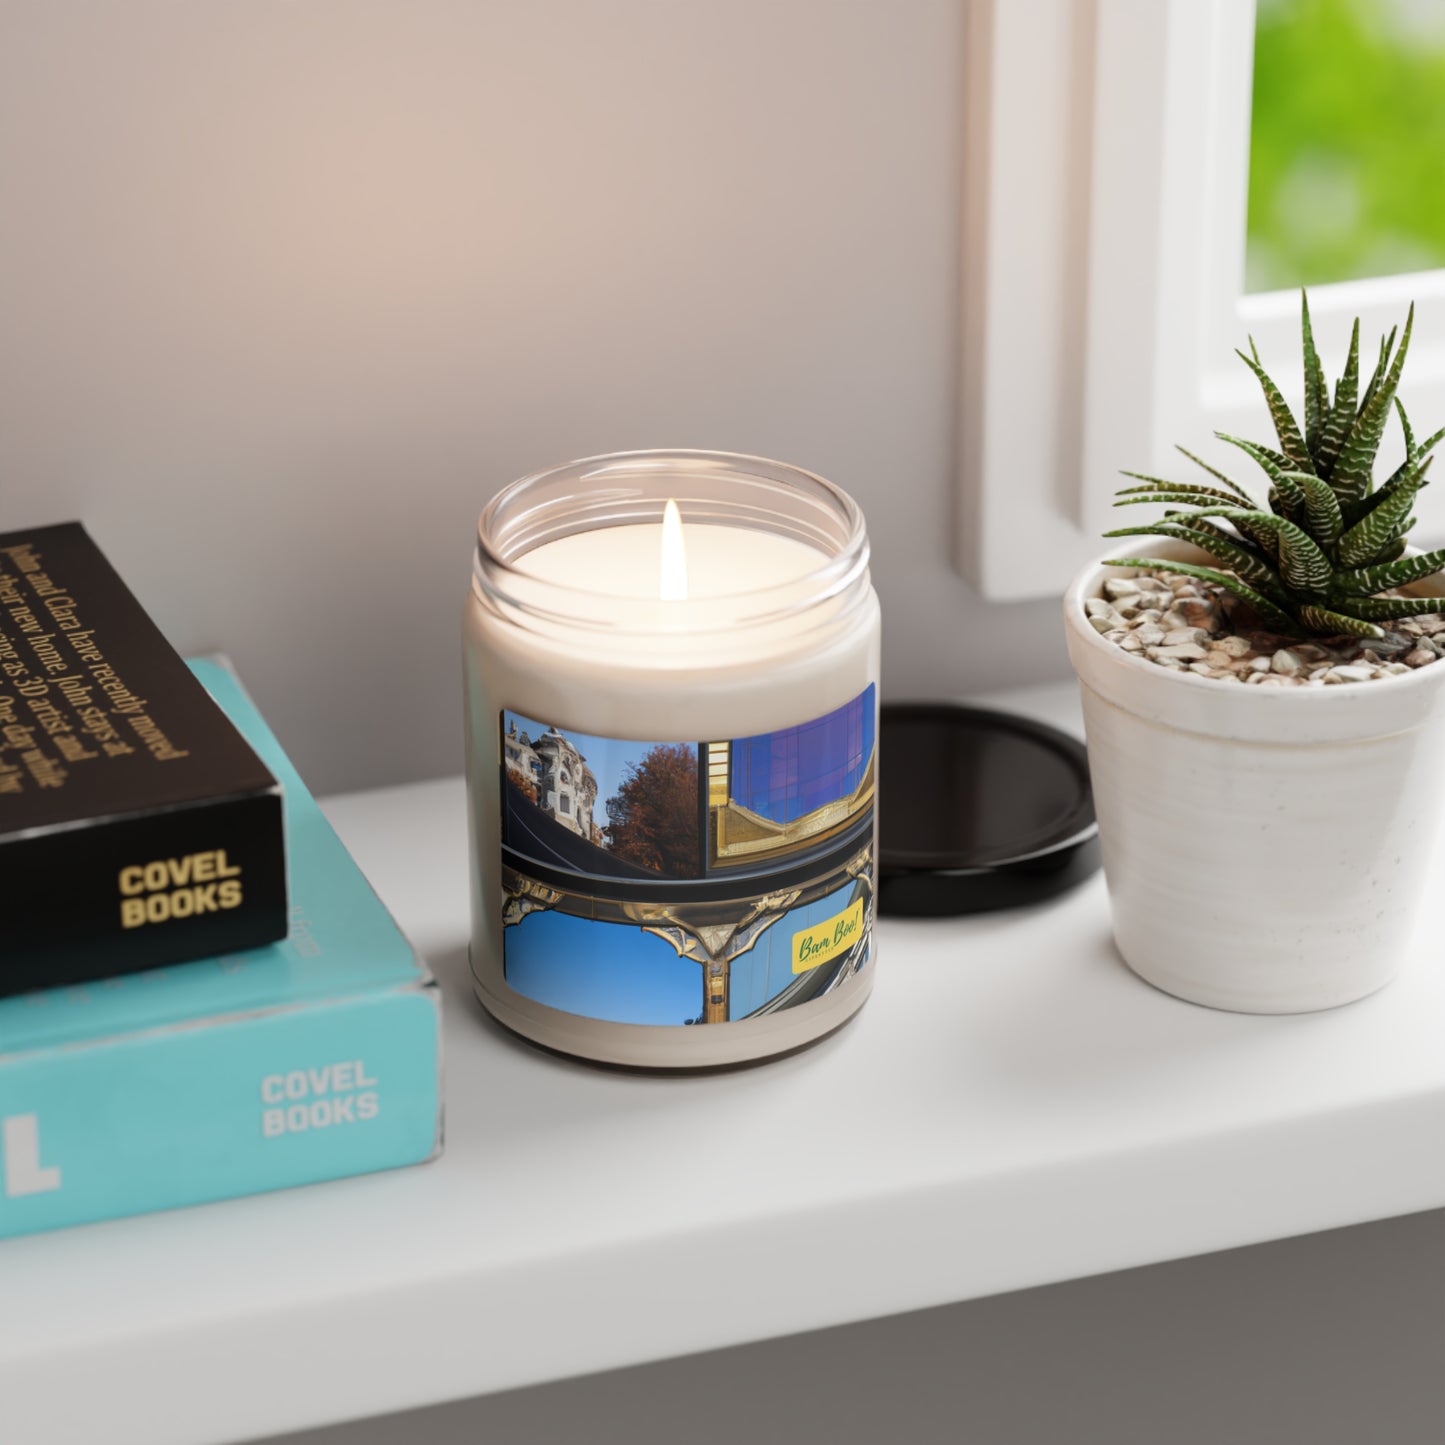 "Capturing the Hidden Beauty: A Visual Mosaic of a Place" - Bam Boo! Lifestyle Eco-friendly Soy Candle